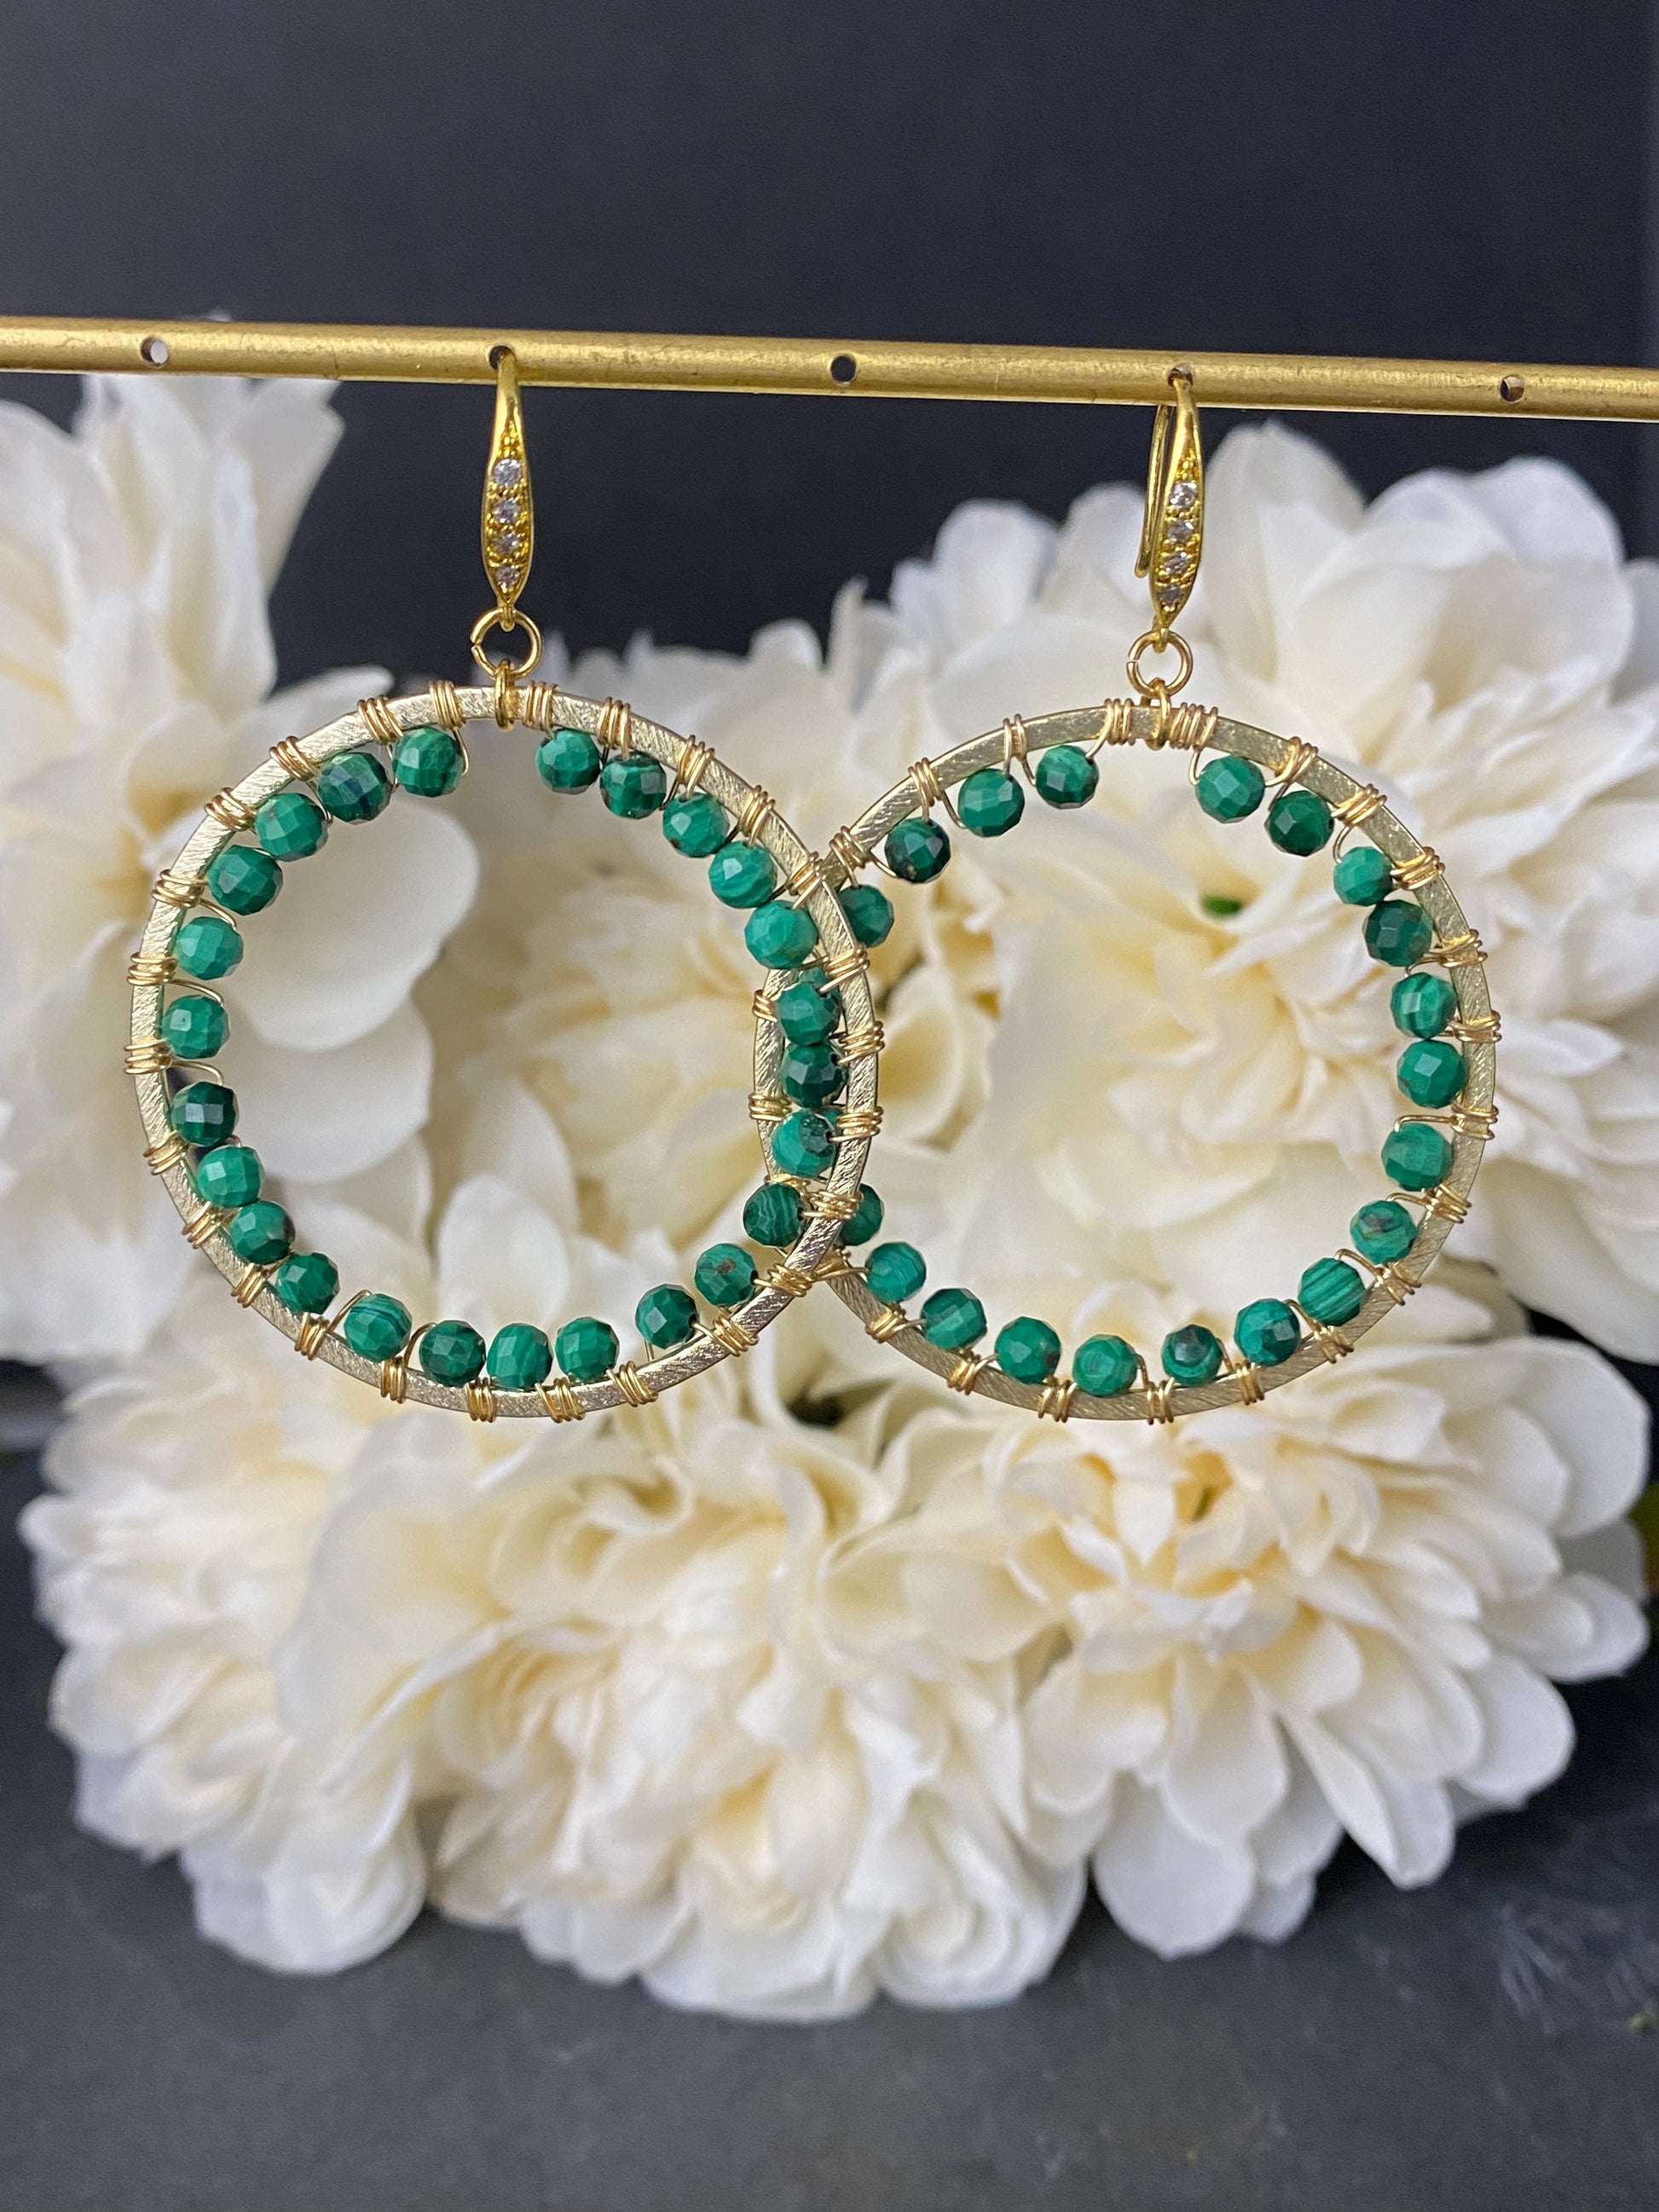 Gold hoops with genuine green malachite stone, earrings, jewelry - Andria Bieber Designs 